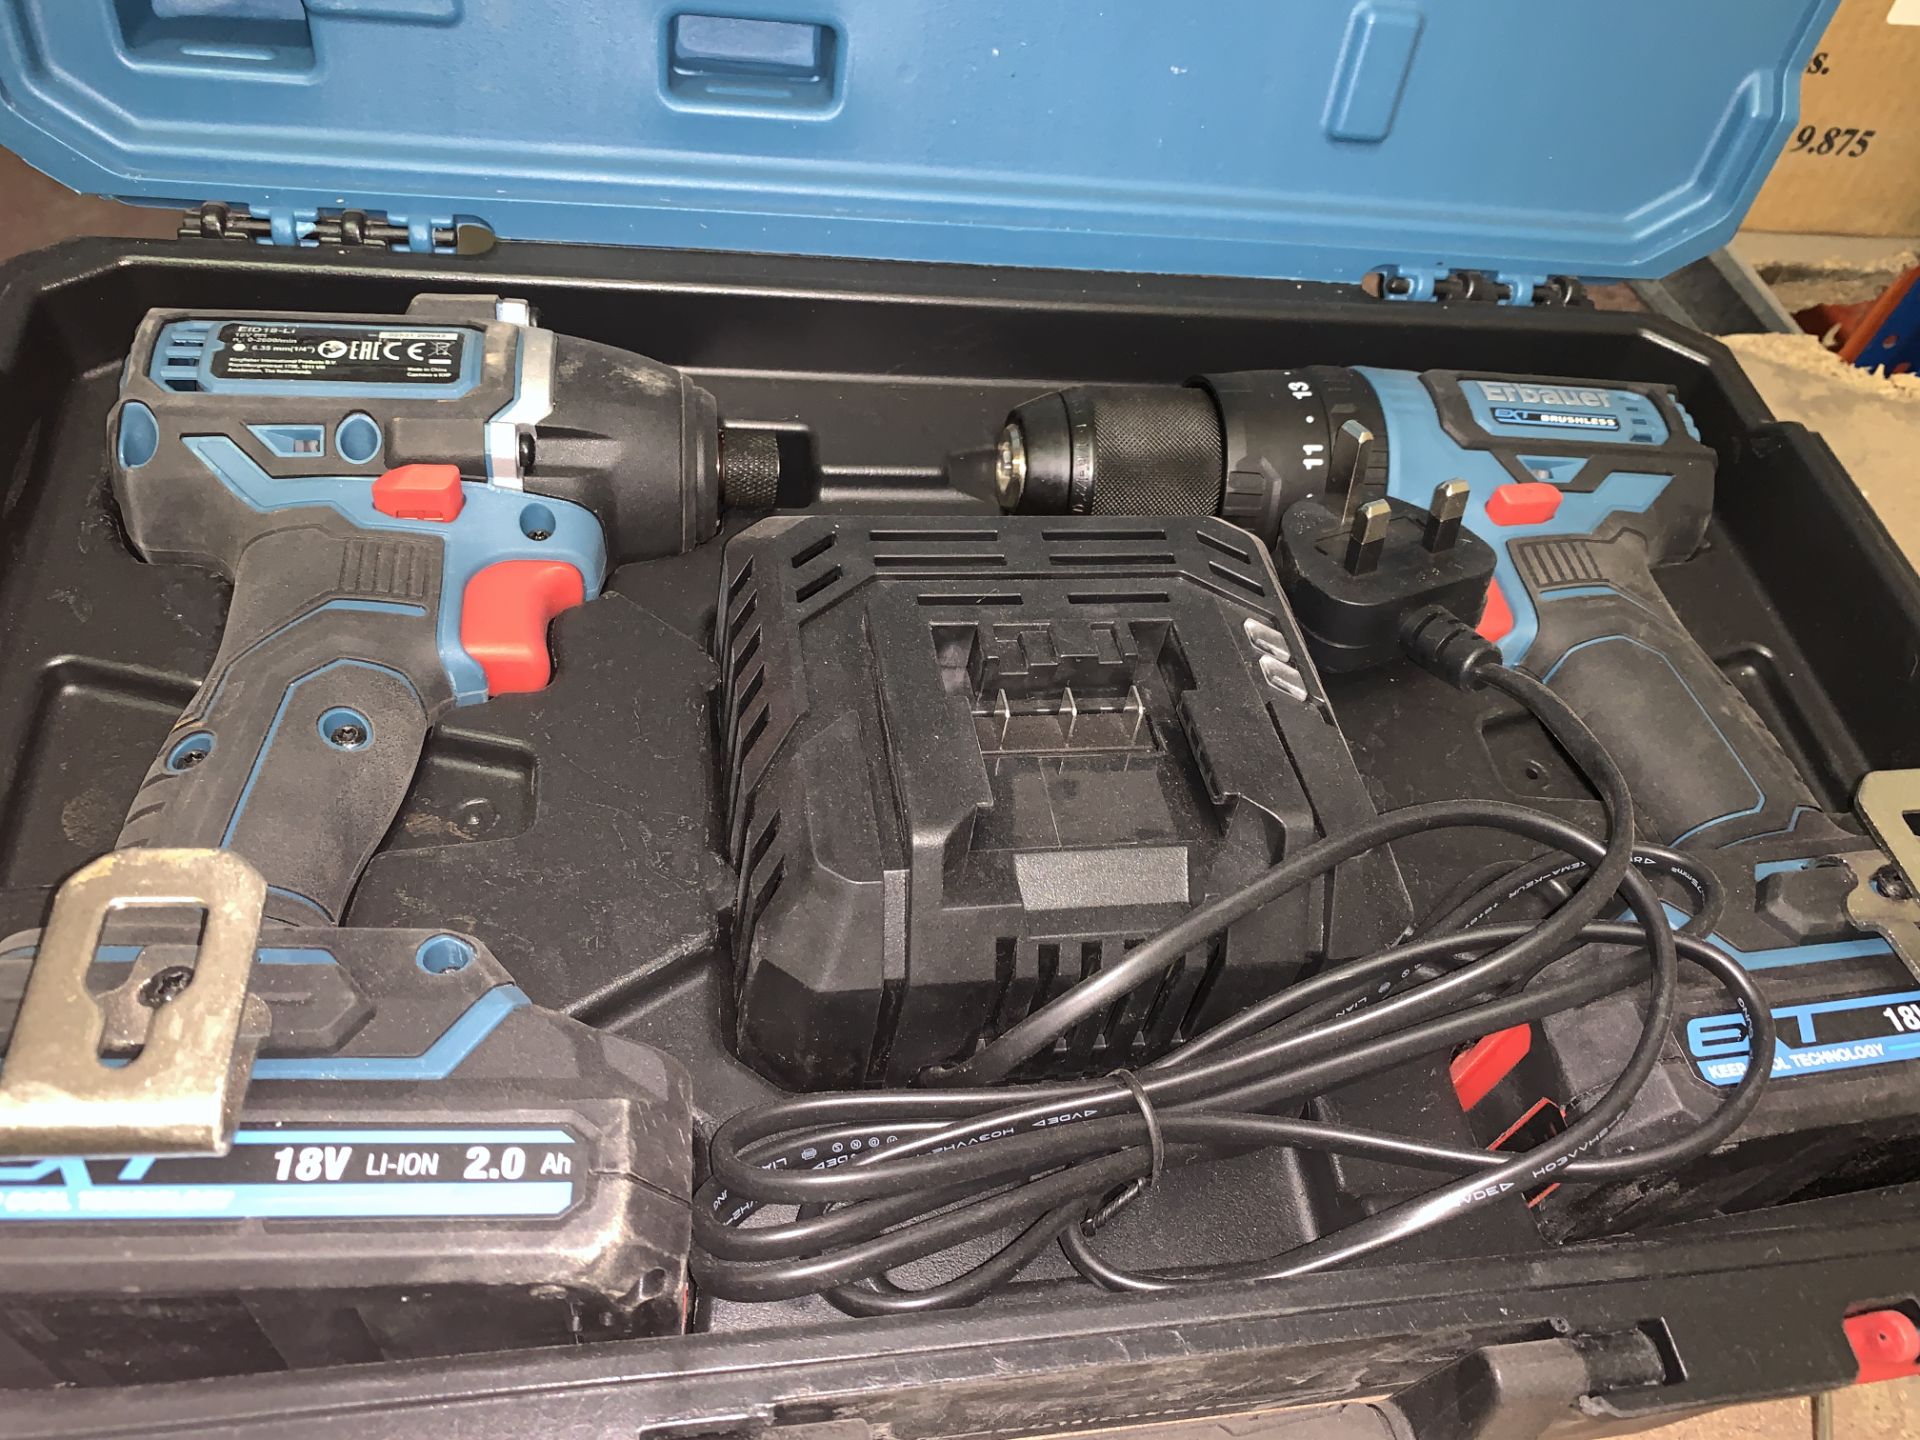 ERBAUER TWIN PACK COMBI DRILL AND IMPACT DRIVER COMES WITH 2 X BATTERIES, CHARGER AND CARRY CASE (